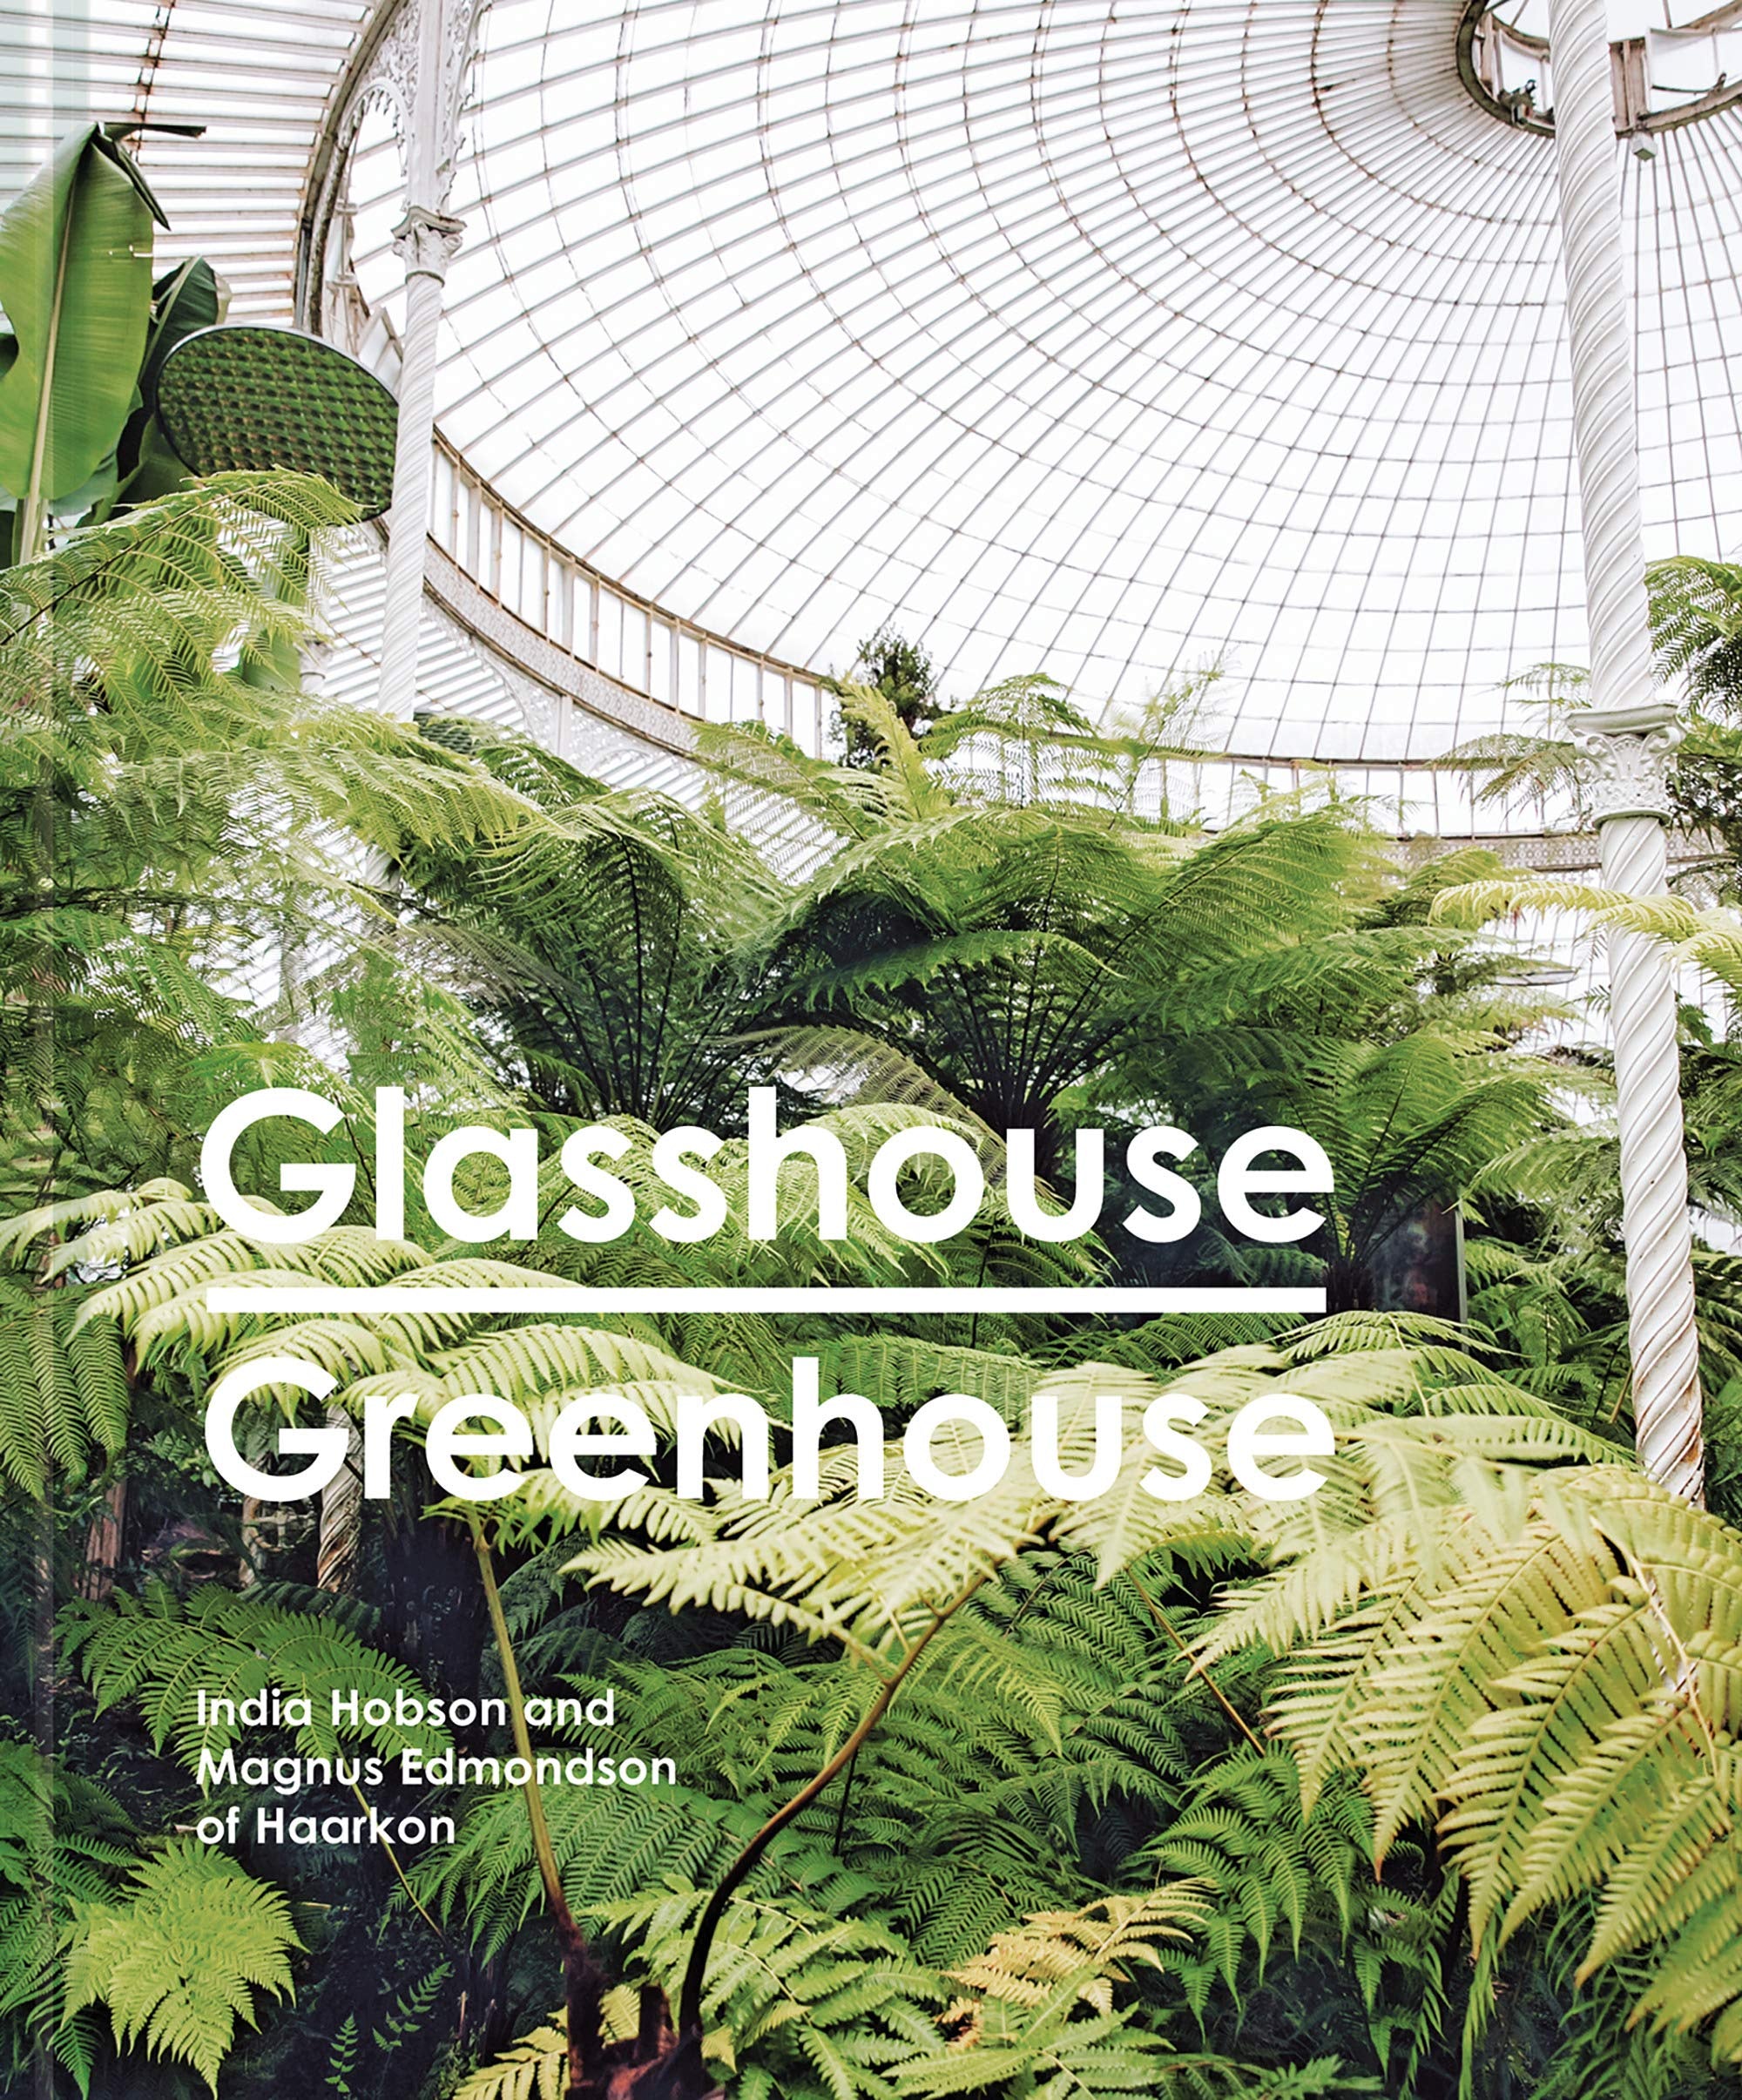 Glasshouse Greenhouse by India Hobsun and Magnus Edmonson of Haarkon